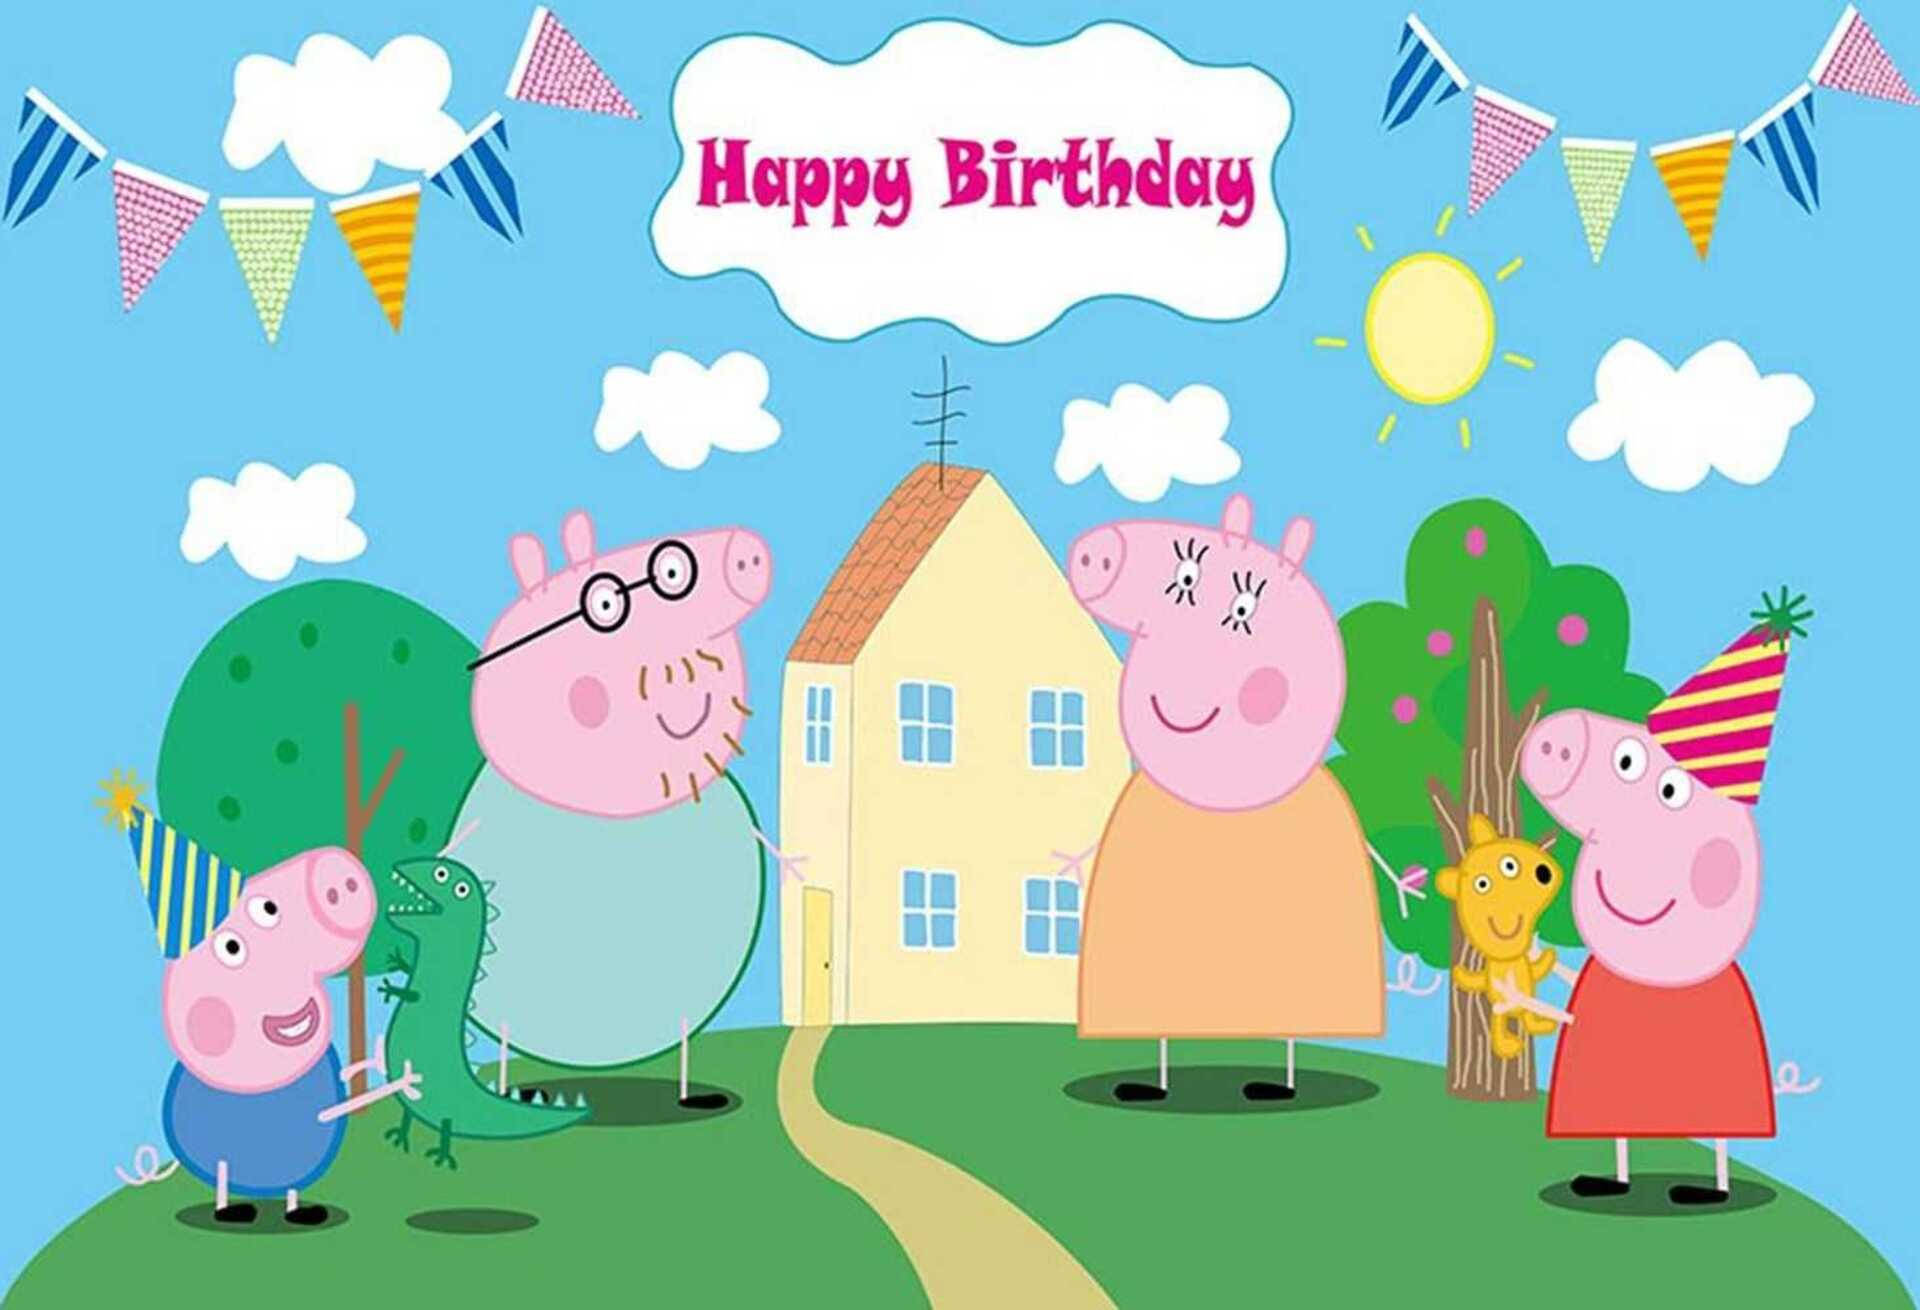 A Happy Birthday Greeting From Peppa Pig's House Wallpaper